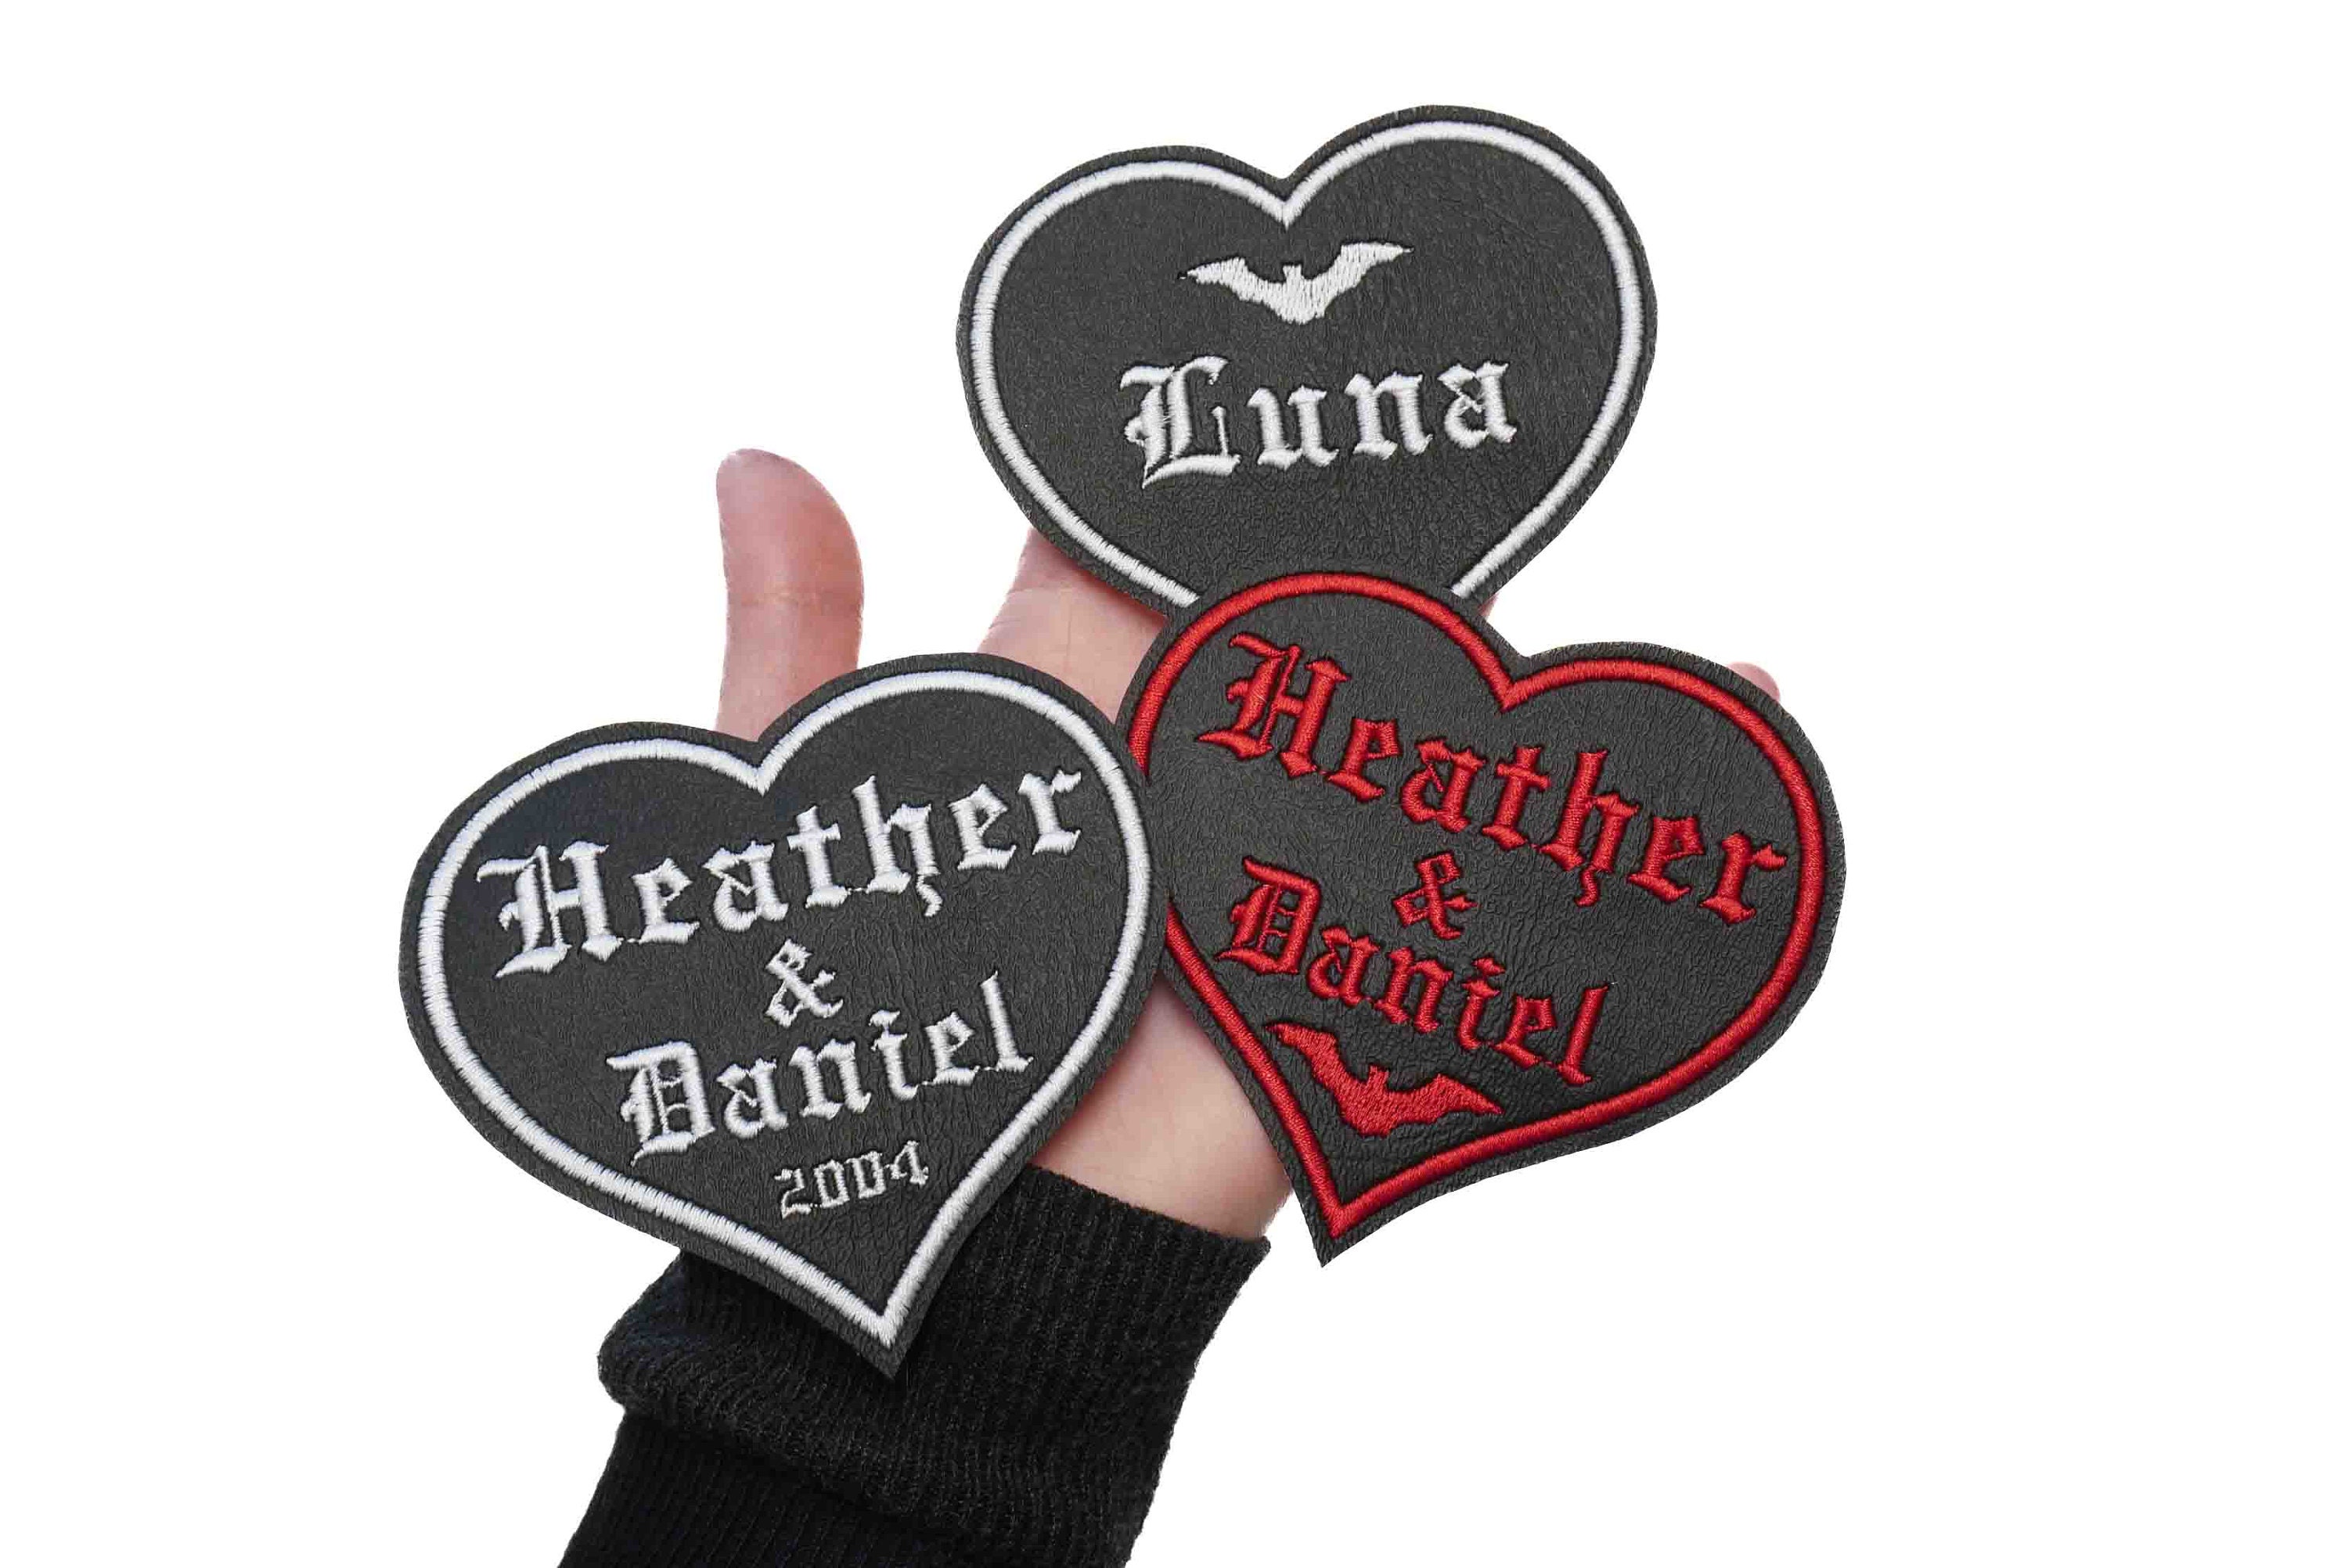 Snikke Gothic Iron on Letters for Clothing - A-Z - 26 Varsity Letter Patches - Goth Iron on Patches for Clothing - 2 inch Laser-Cut Letter Fabric